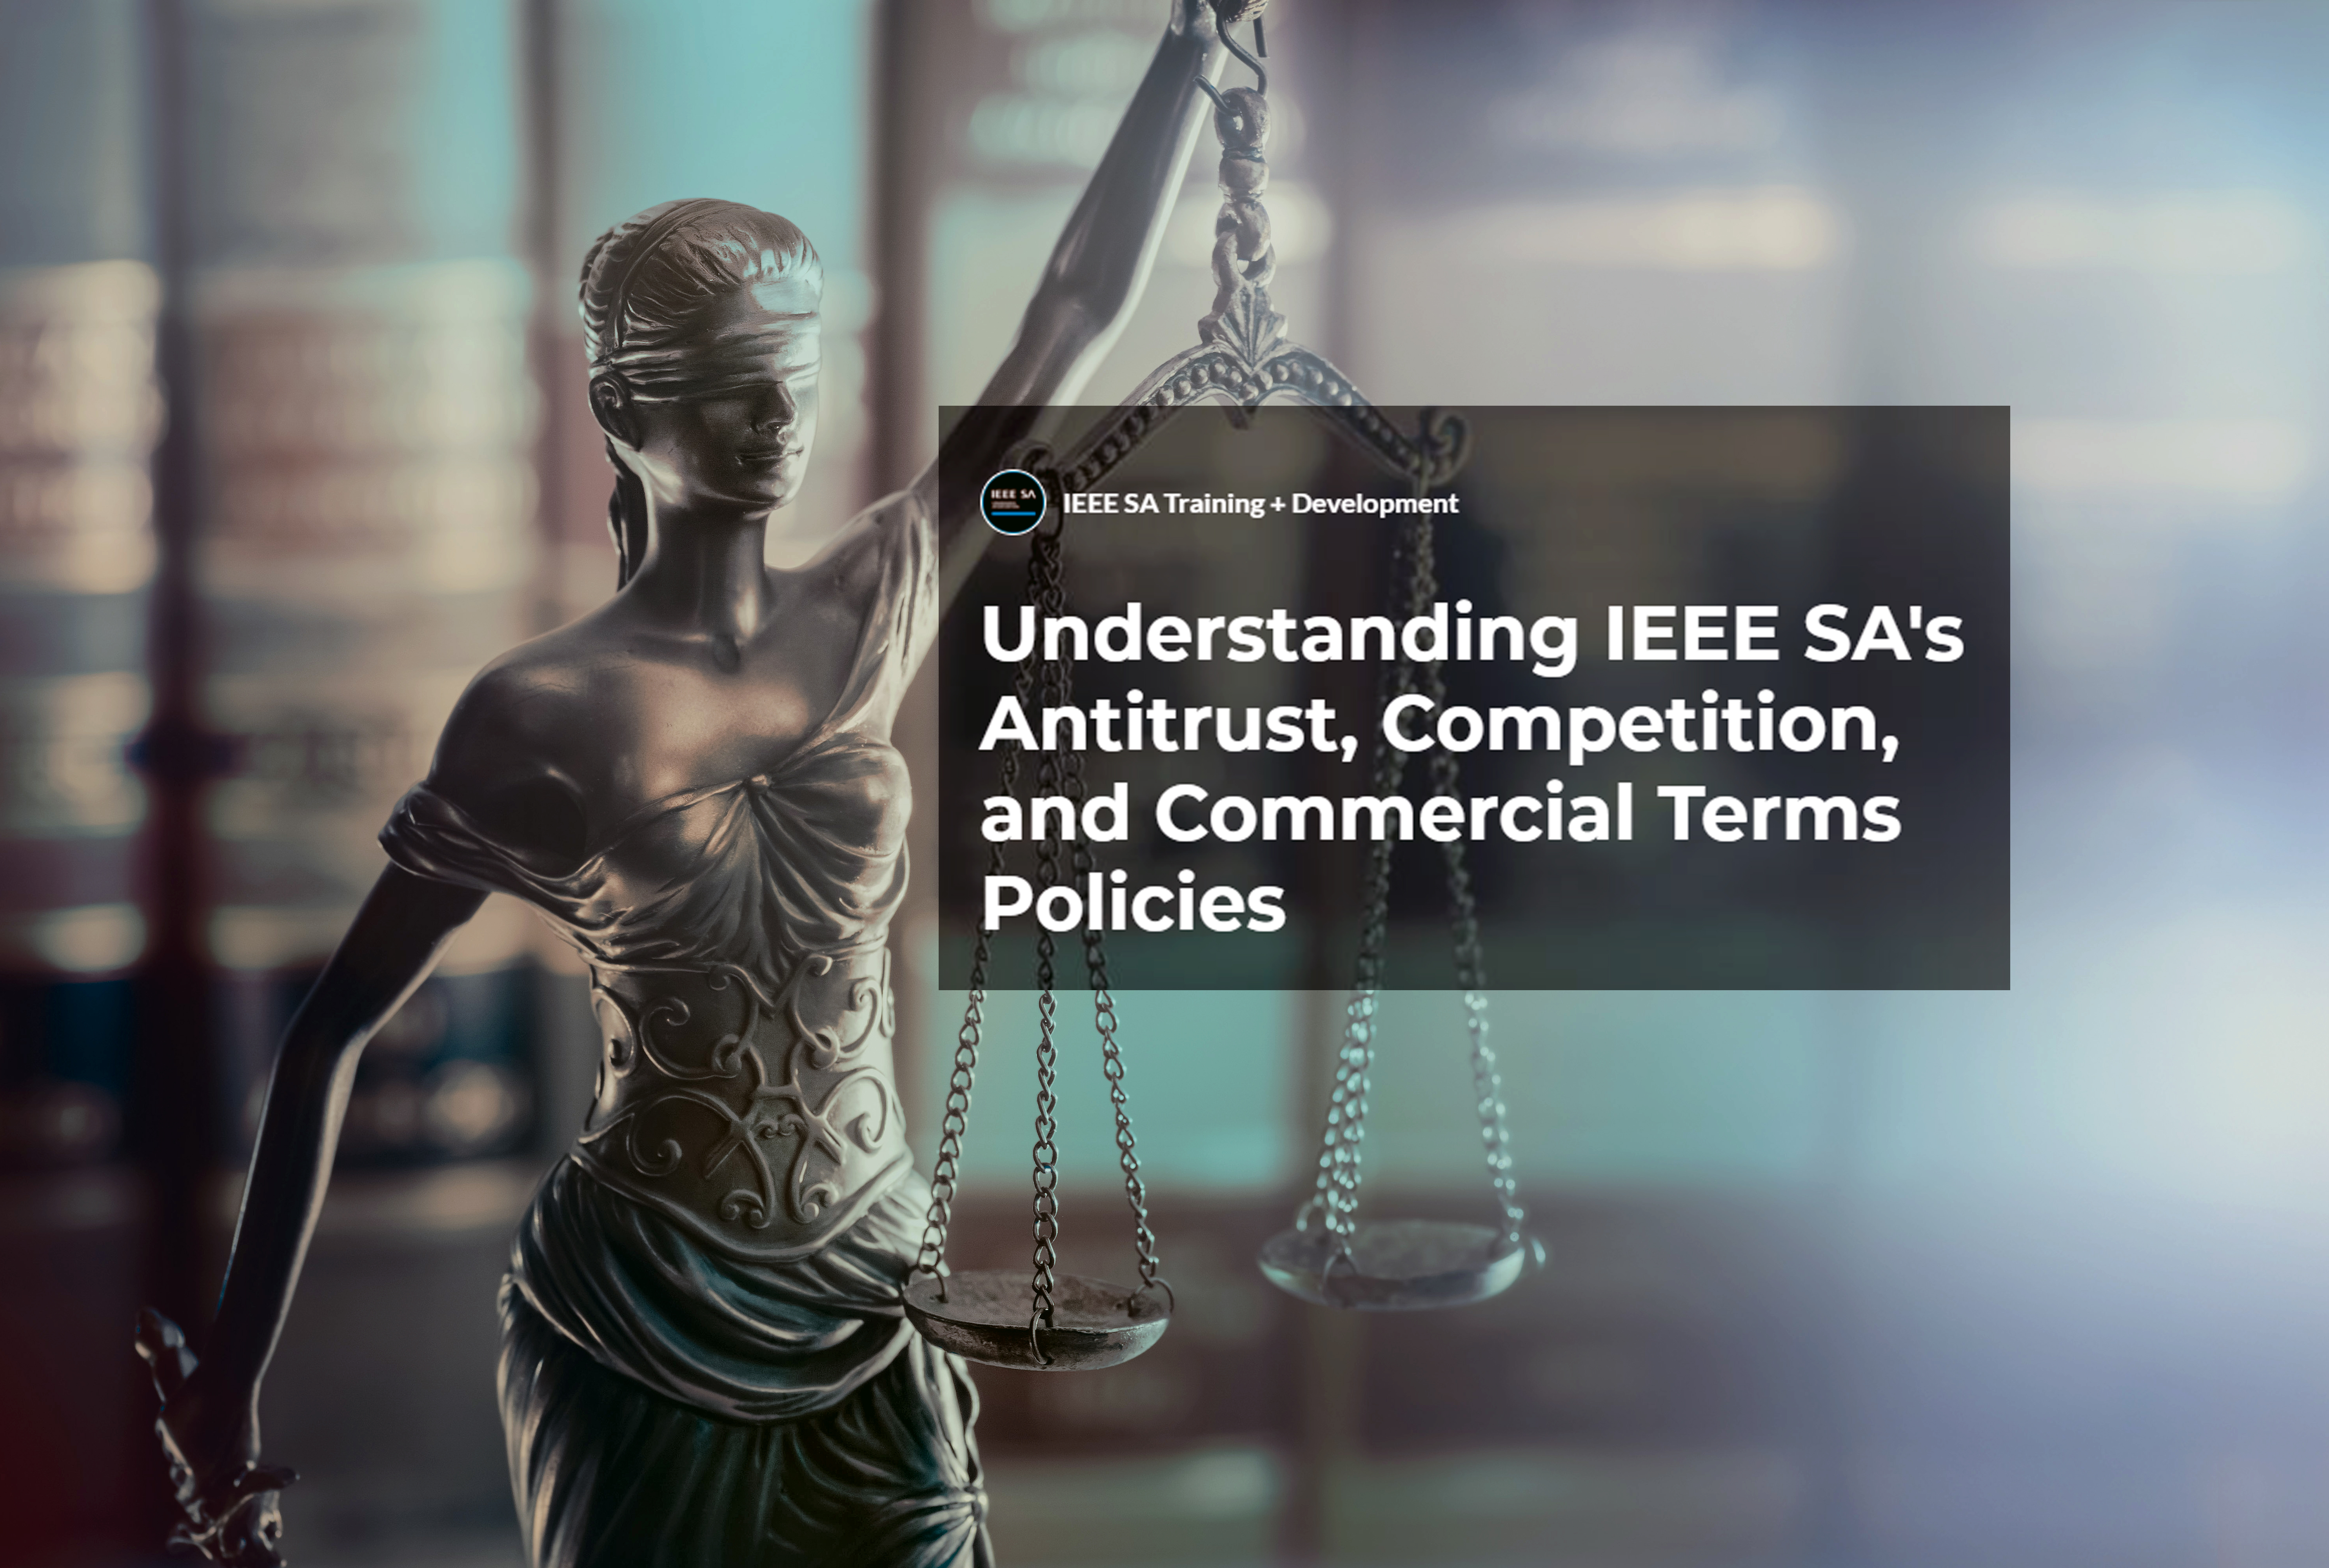 Understanding IEEE SA's Antitrust, Competition, and Commercial Terms Policies